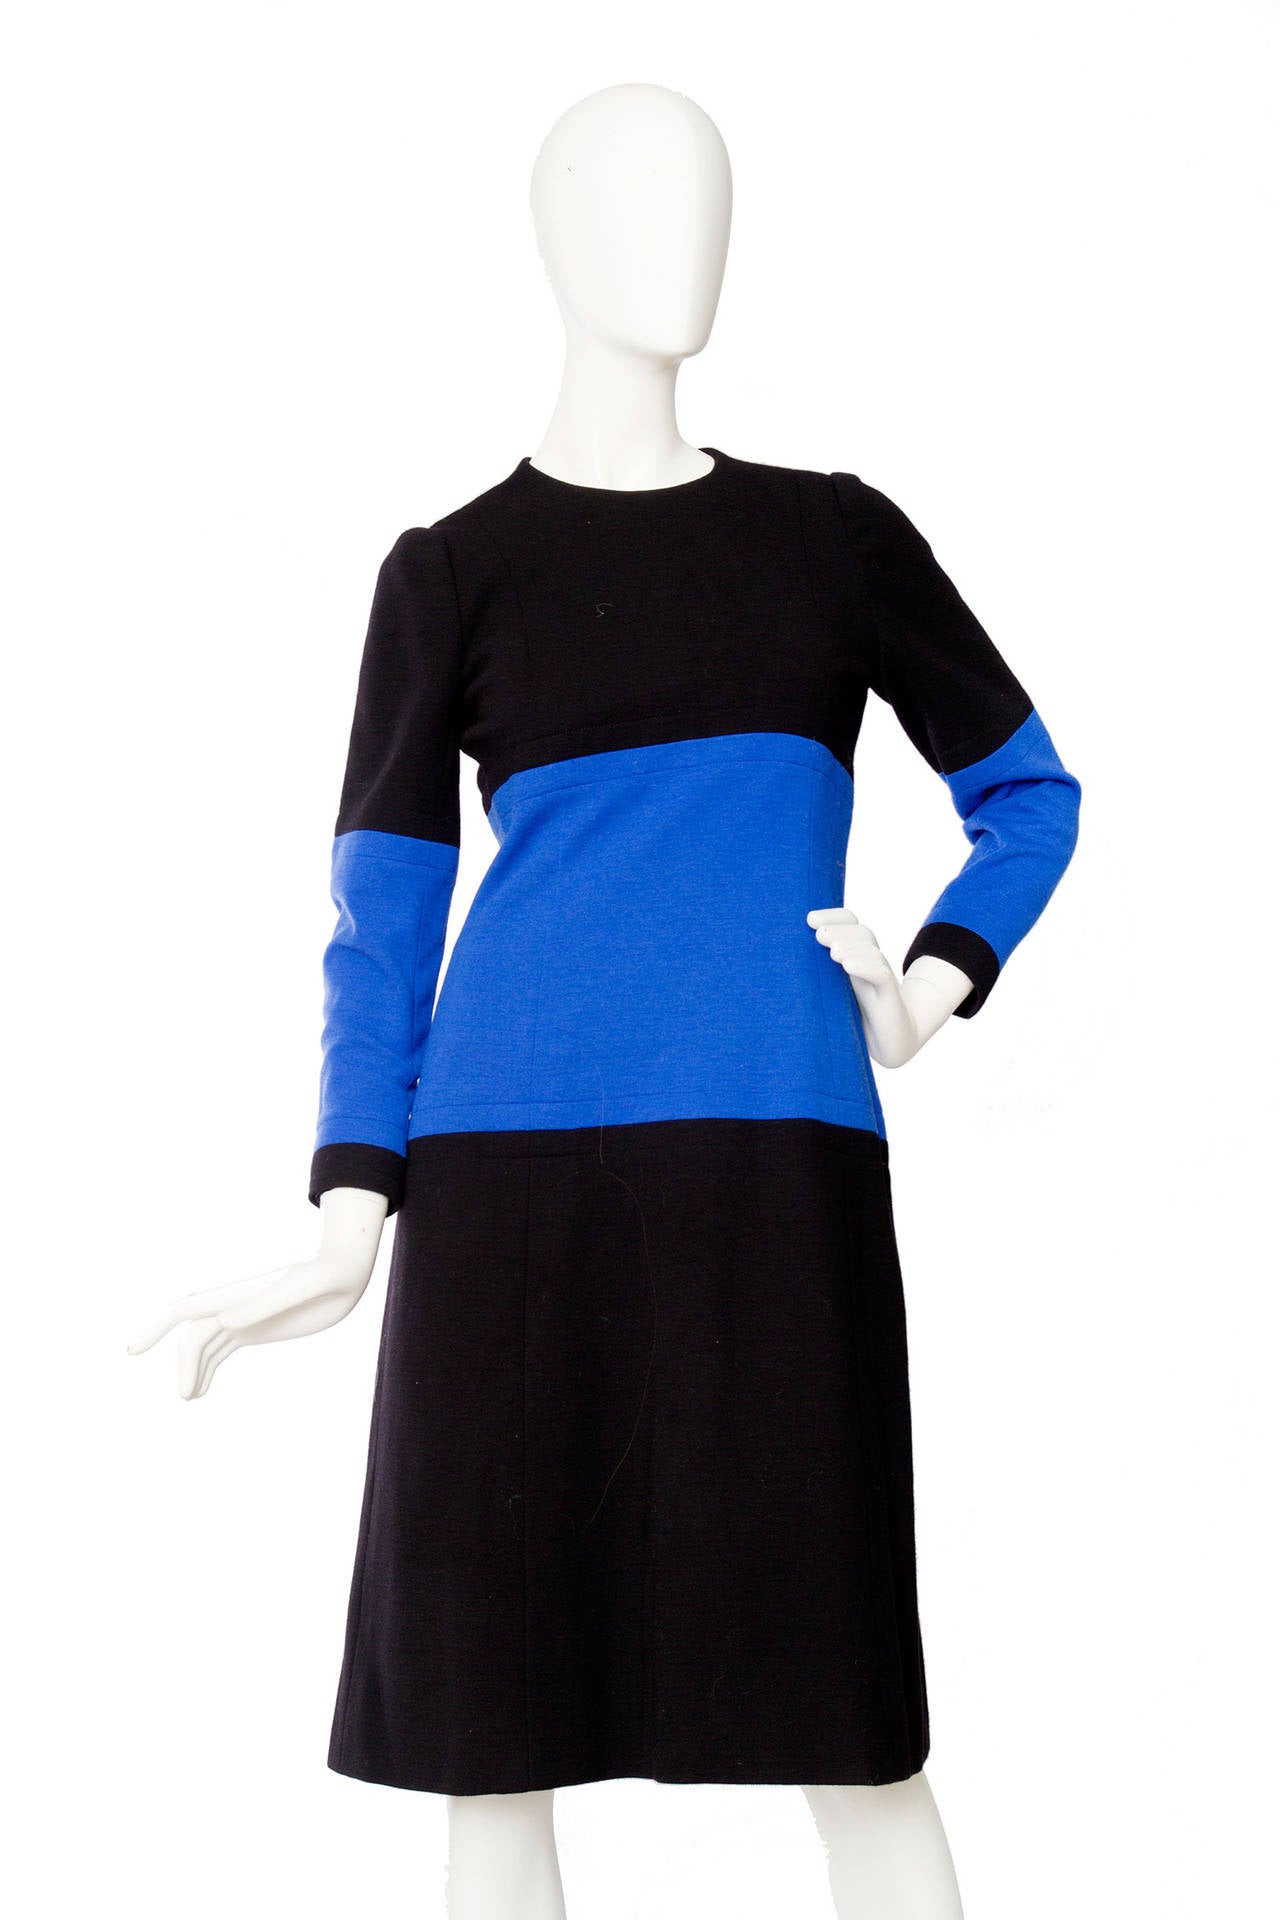 A 1960s Givenchy haute couture black wool dress with a bright blue panel detail across the midriff and sleeves. The dress is fully lined, has a round neckline and closes in the back with a metal zipper closure. 

The dress is numbered: